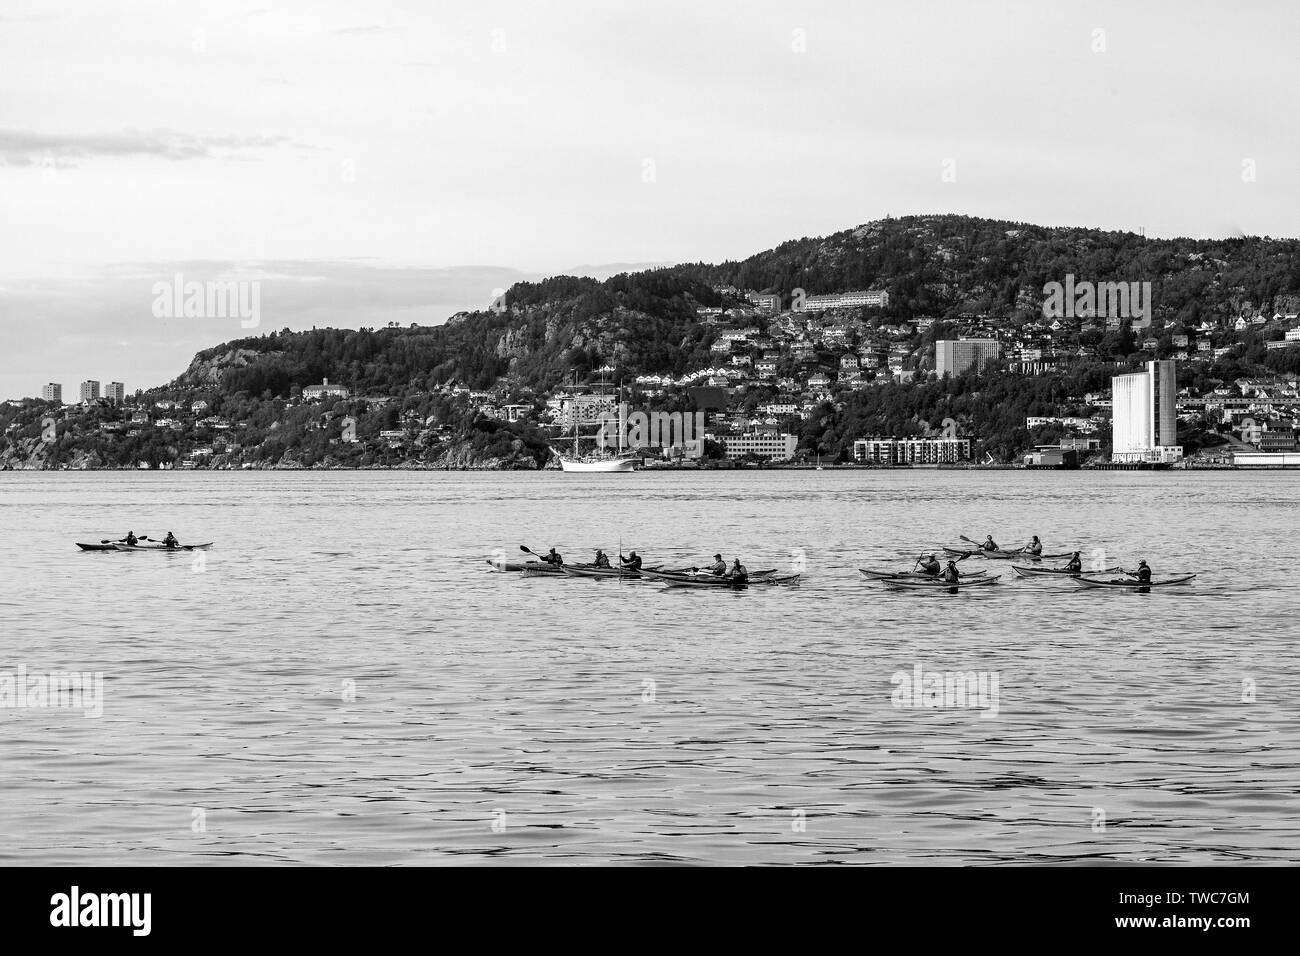 Group of kayakers at Byfjorden, outside port of Bergen, Norway. Tall ship Statsraad Lehmkuhl in background. Stock Photo